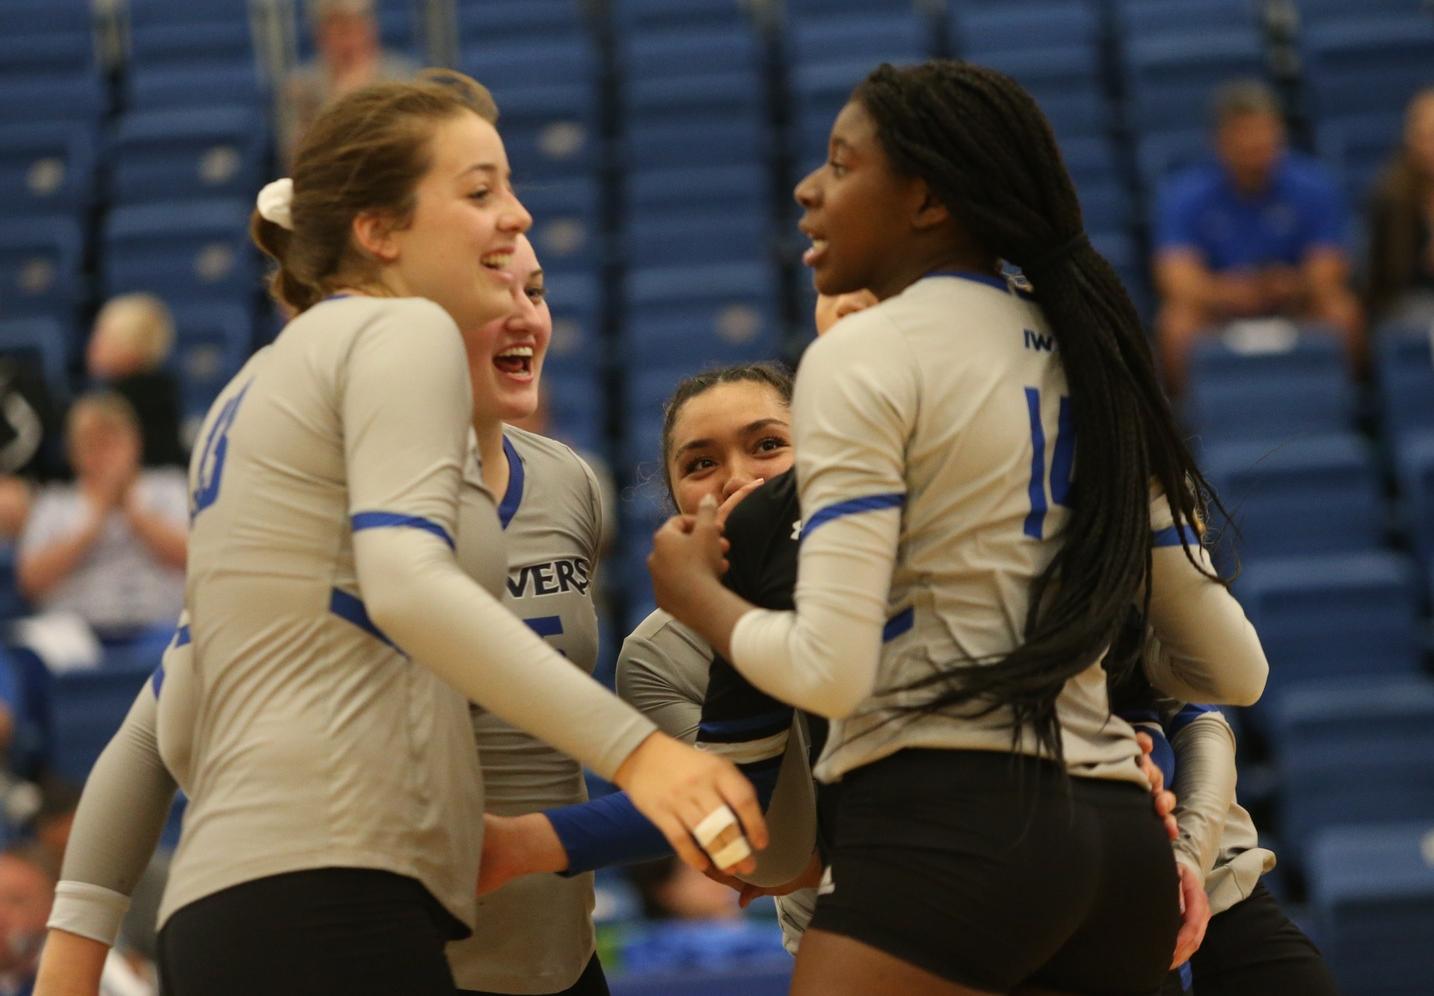 Reivers sweep the day, take out Fort Scott and Johnson County in straight sets